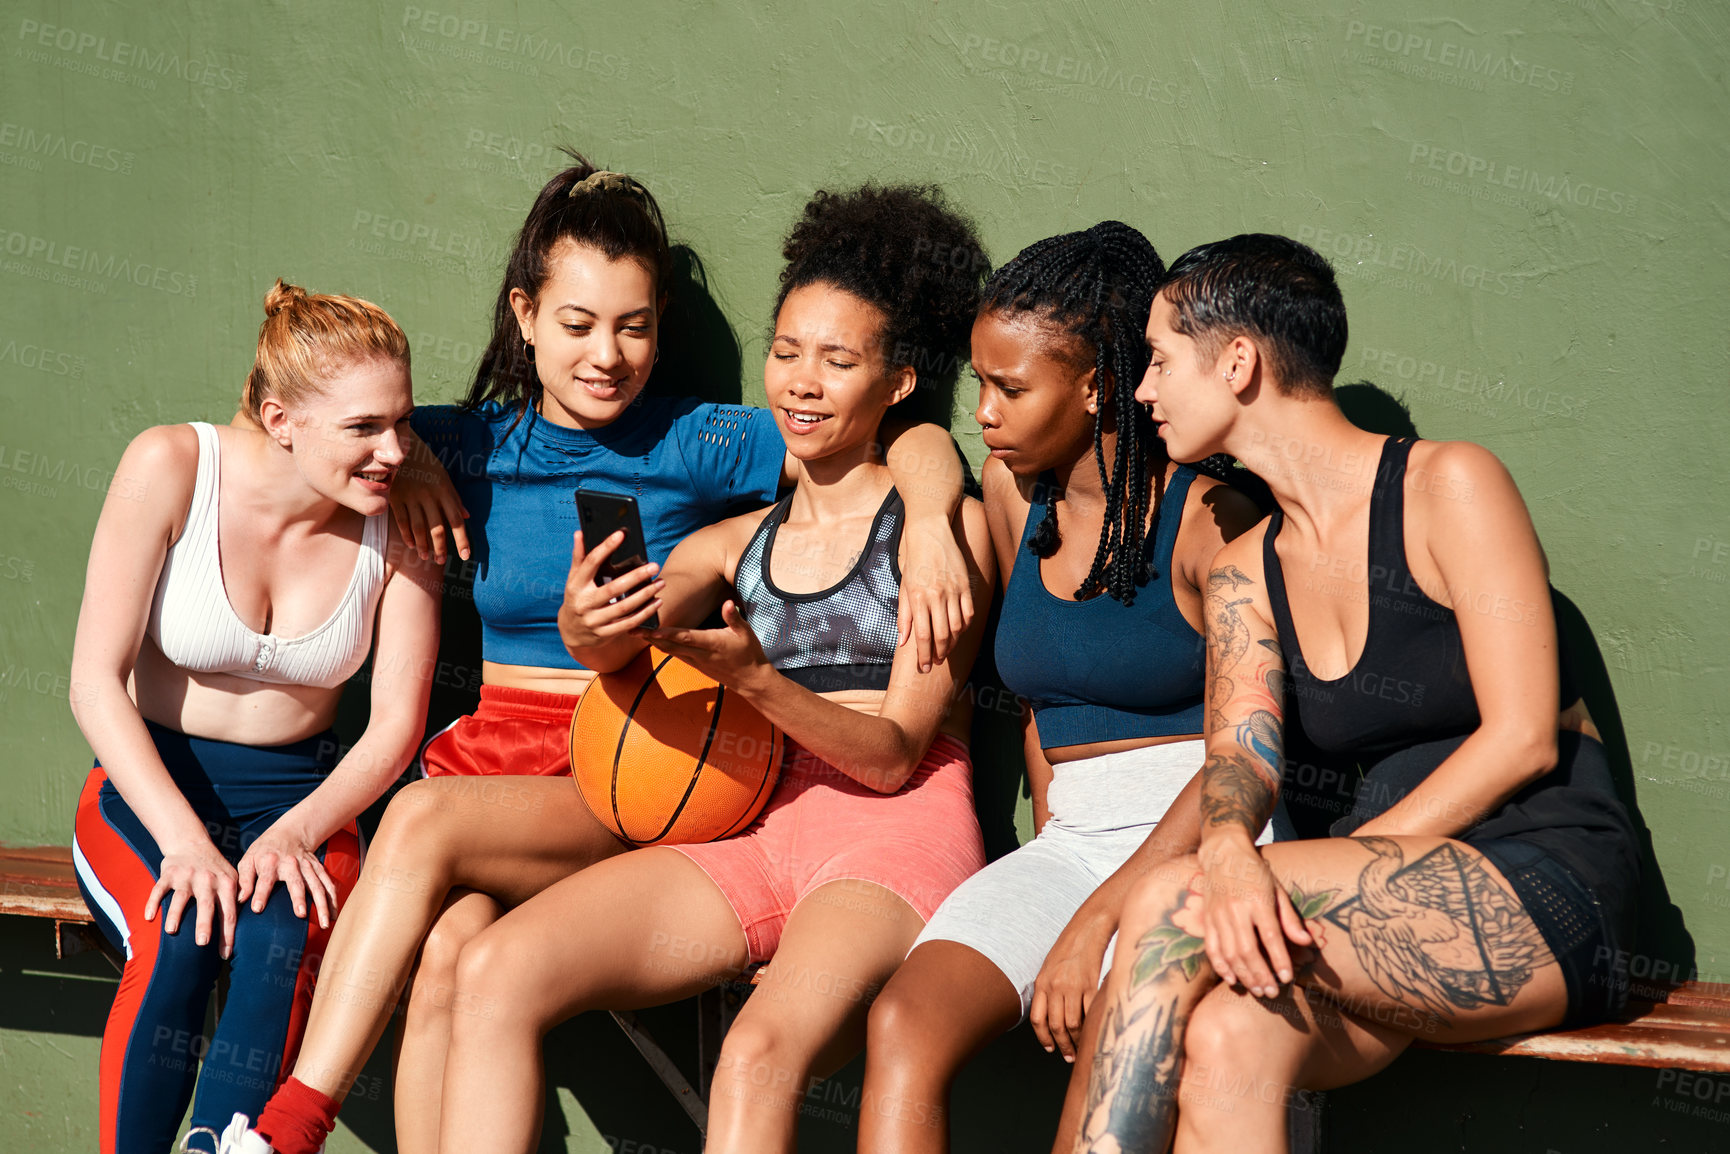 Buy stock photo Cropped shot of a diverse group of sportswomen sitting together after playing basketball and looking at a cellphone